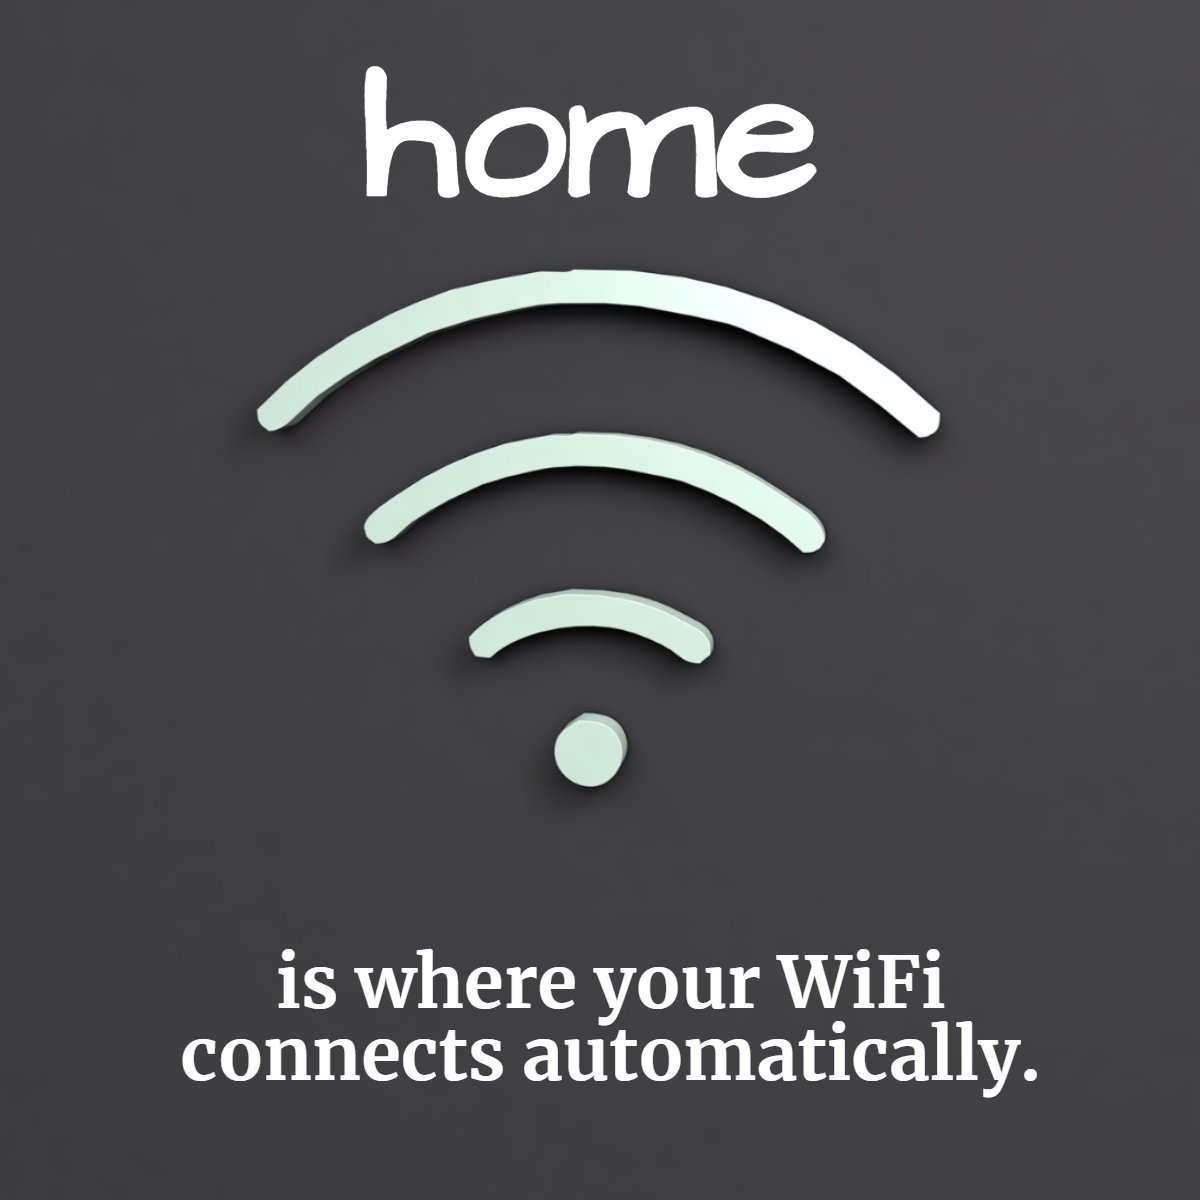 Home is where your WiFi... Connects automatically. 📱📶

#home #wifi #stayhome #homestyle #hometime #homesofinstagram #wearehome
 #myhousefl #realestate #Floridarealestate #sellyourhouse #buyyourhome #JoelSantos #MVPREALTY #LehighAcresFlorida #SWFLRealEstate